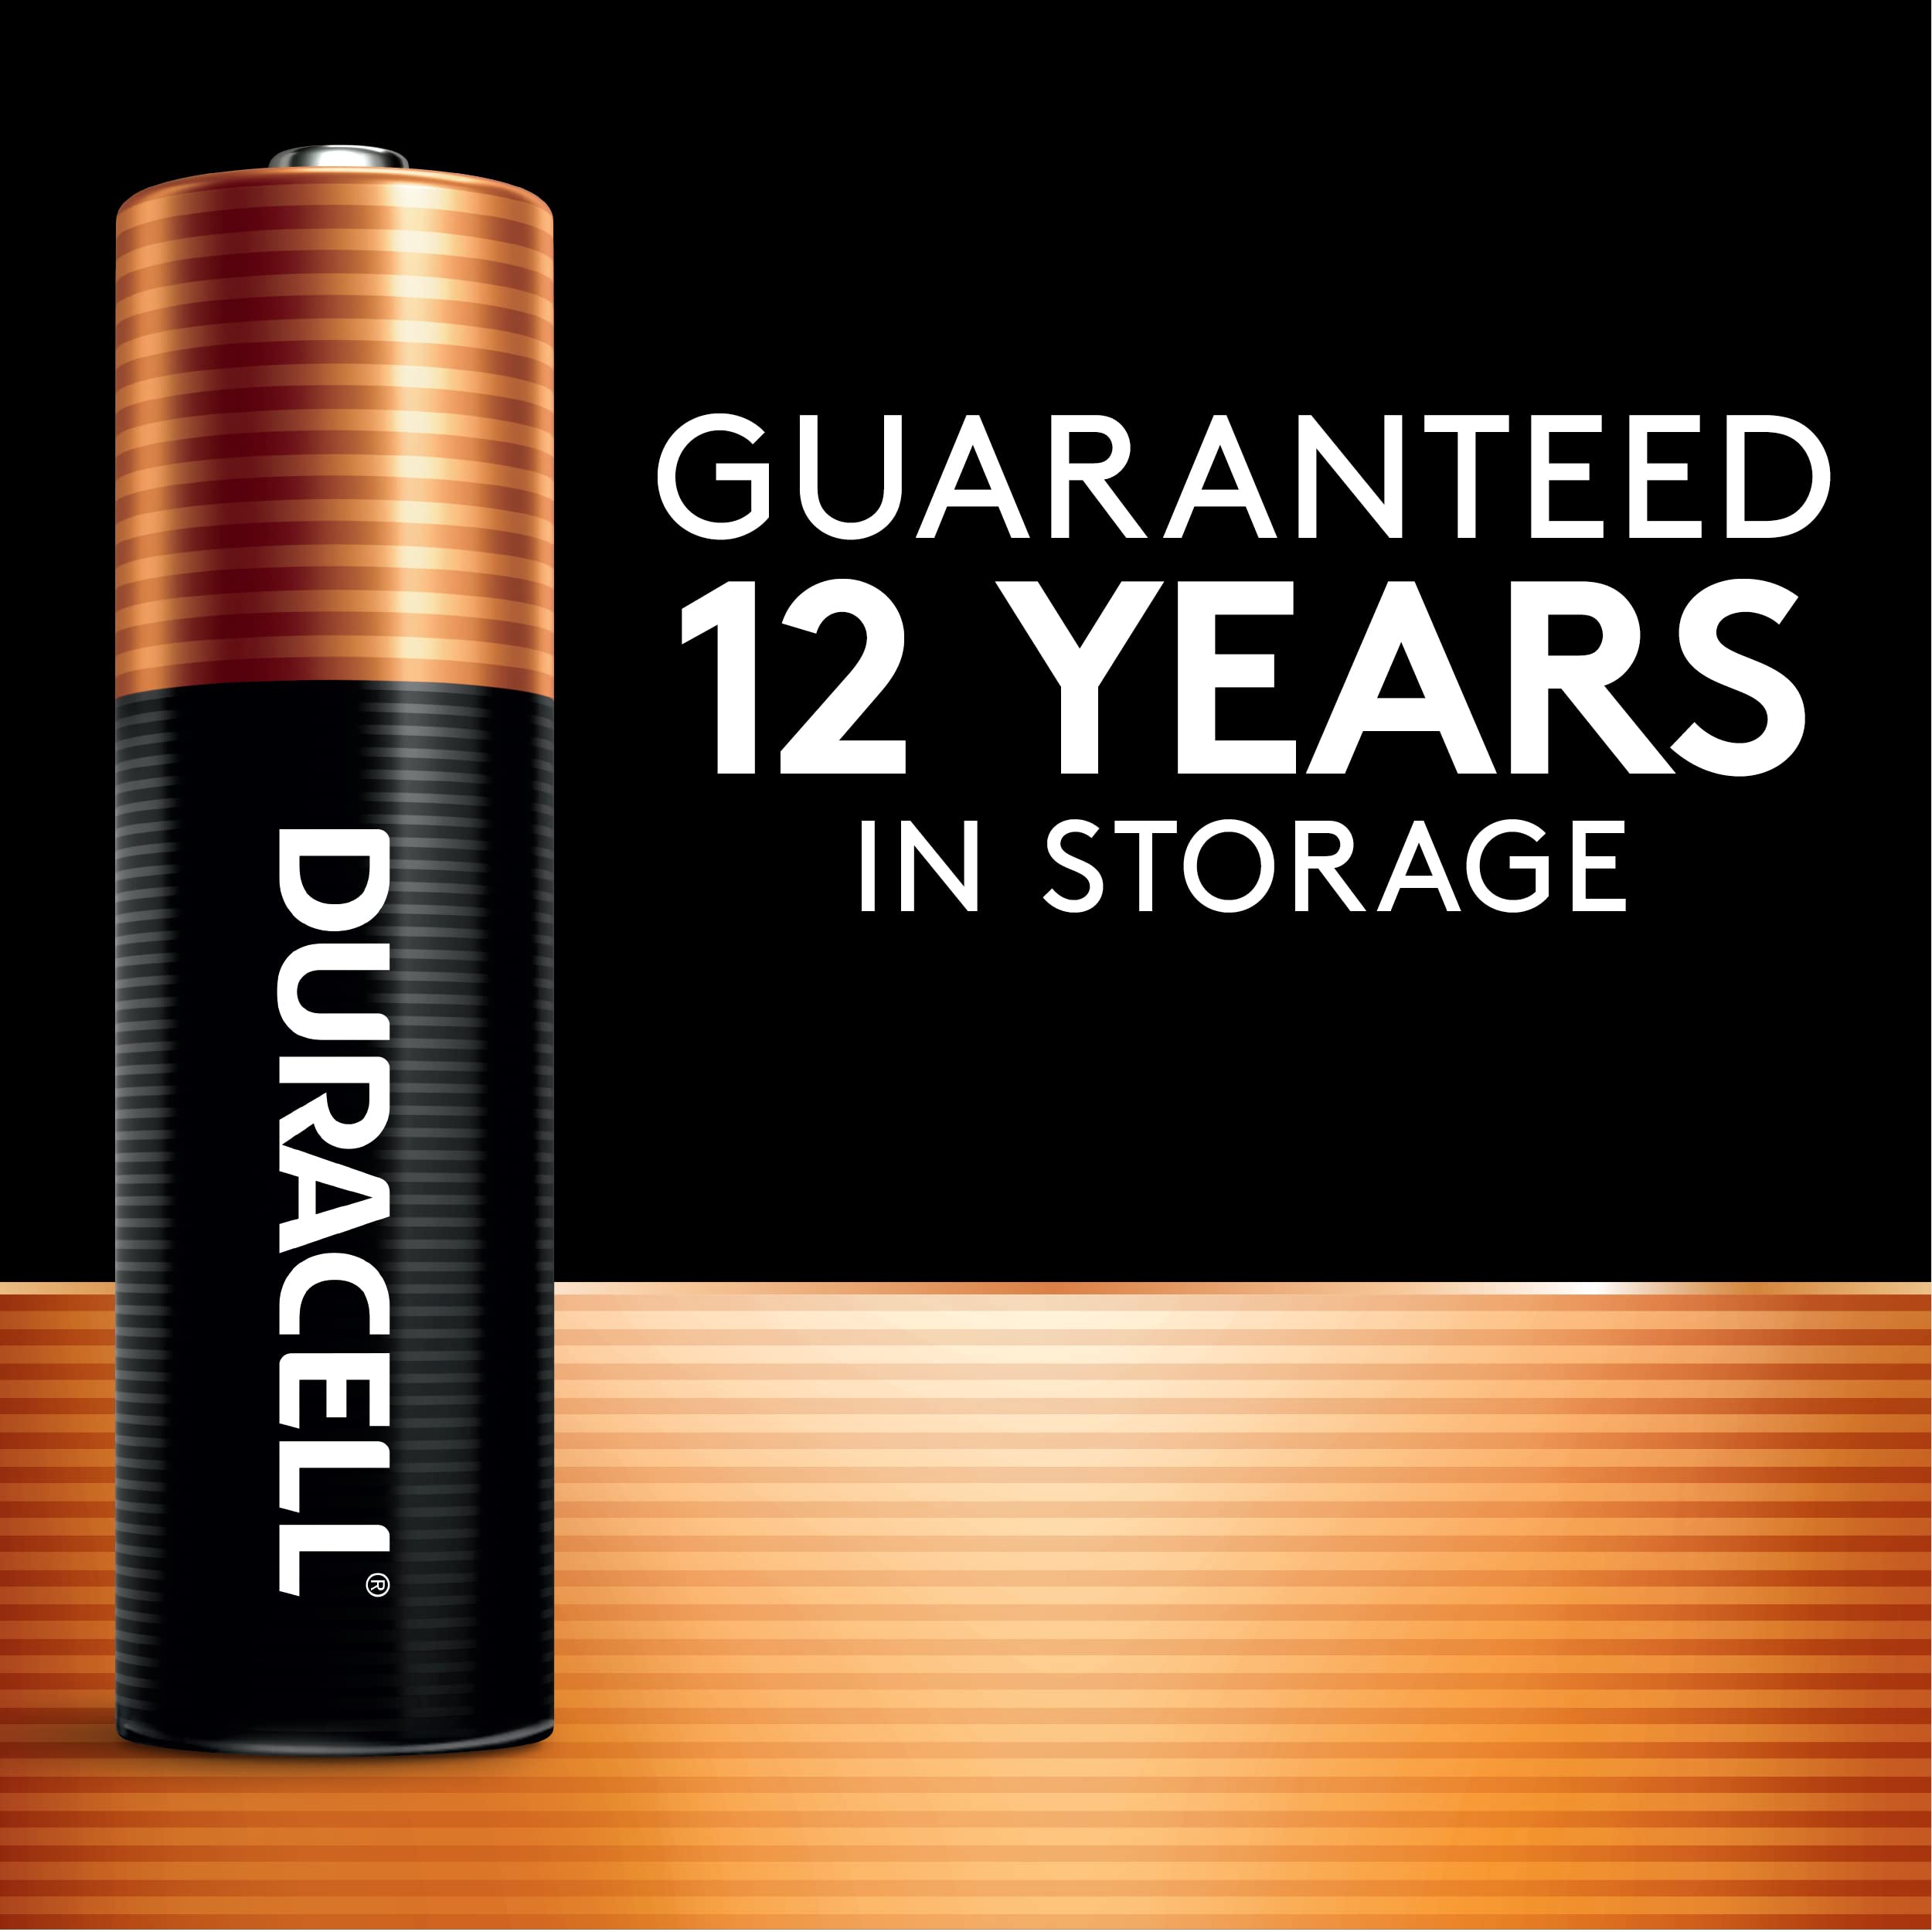 Duracell Coppertop AA Batteries with Power Boost Ingredients, 4 Count Pack Double A Battery with Long-lasting Power, Alkaline AA Battery for Household and Office Devices